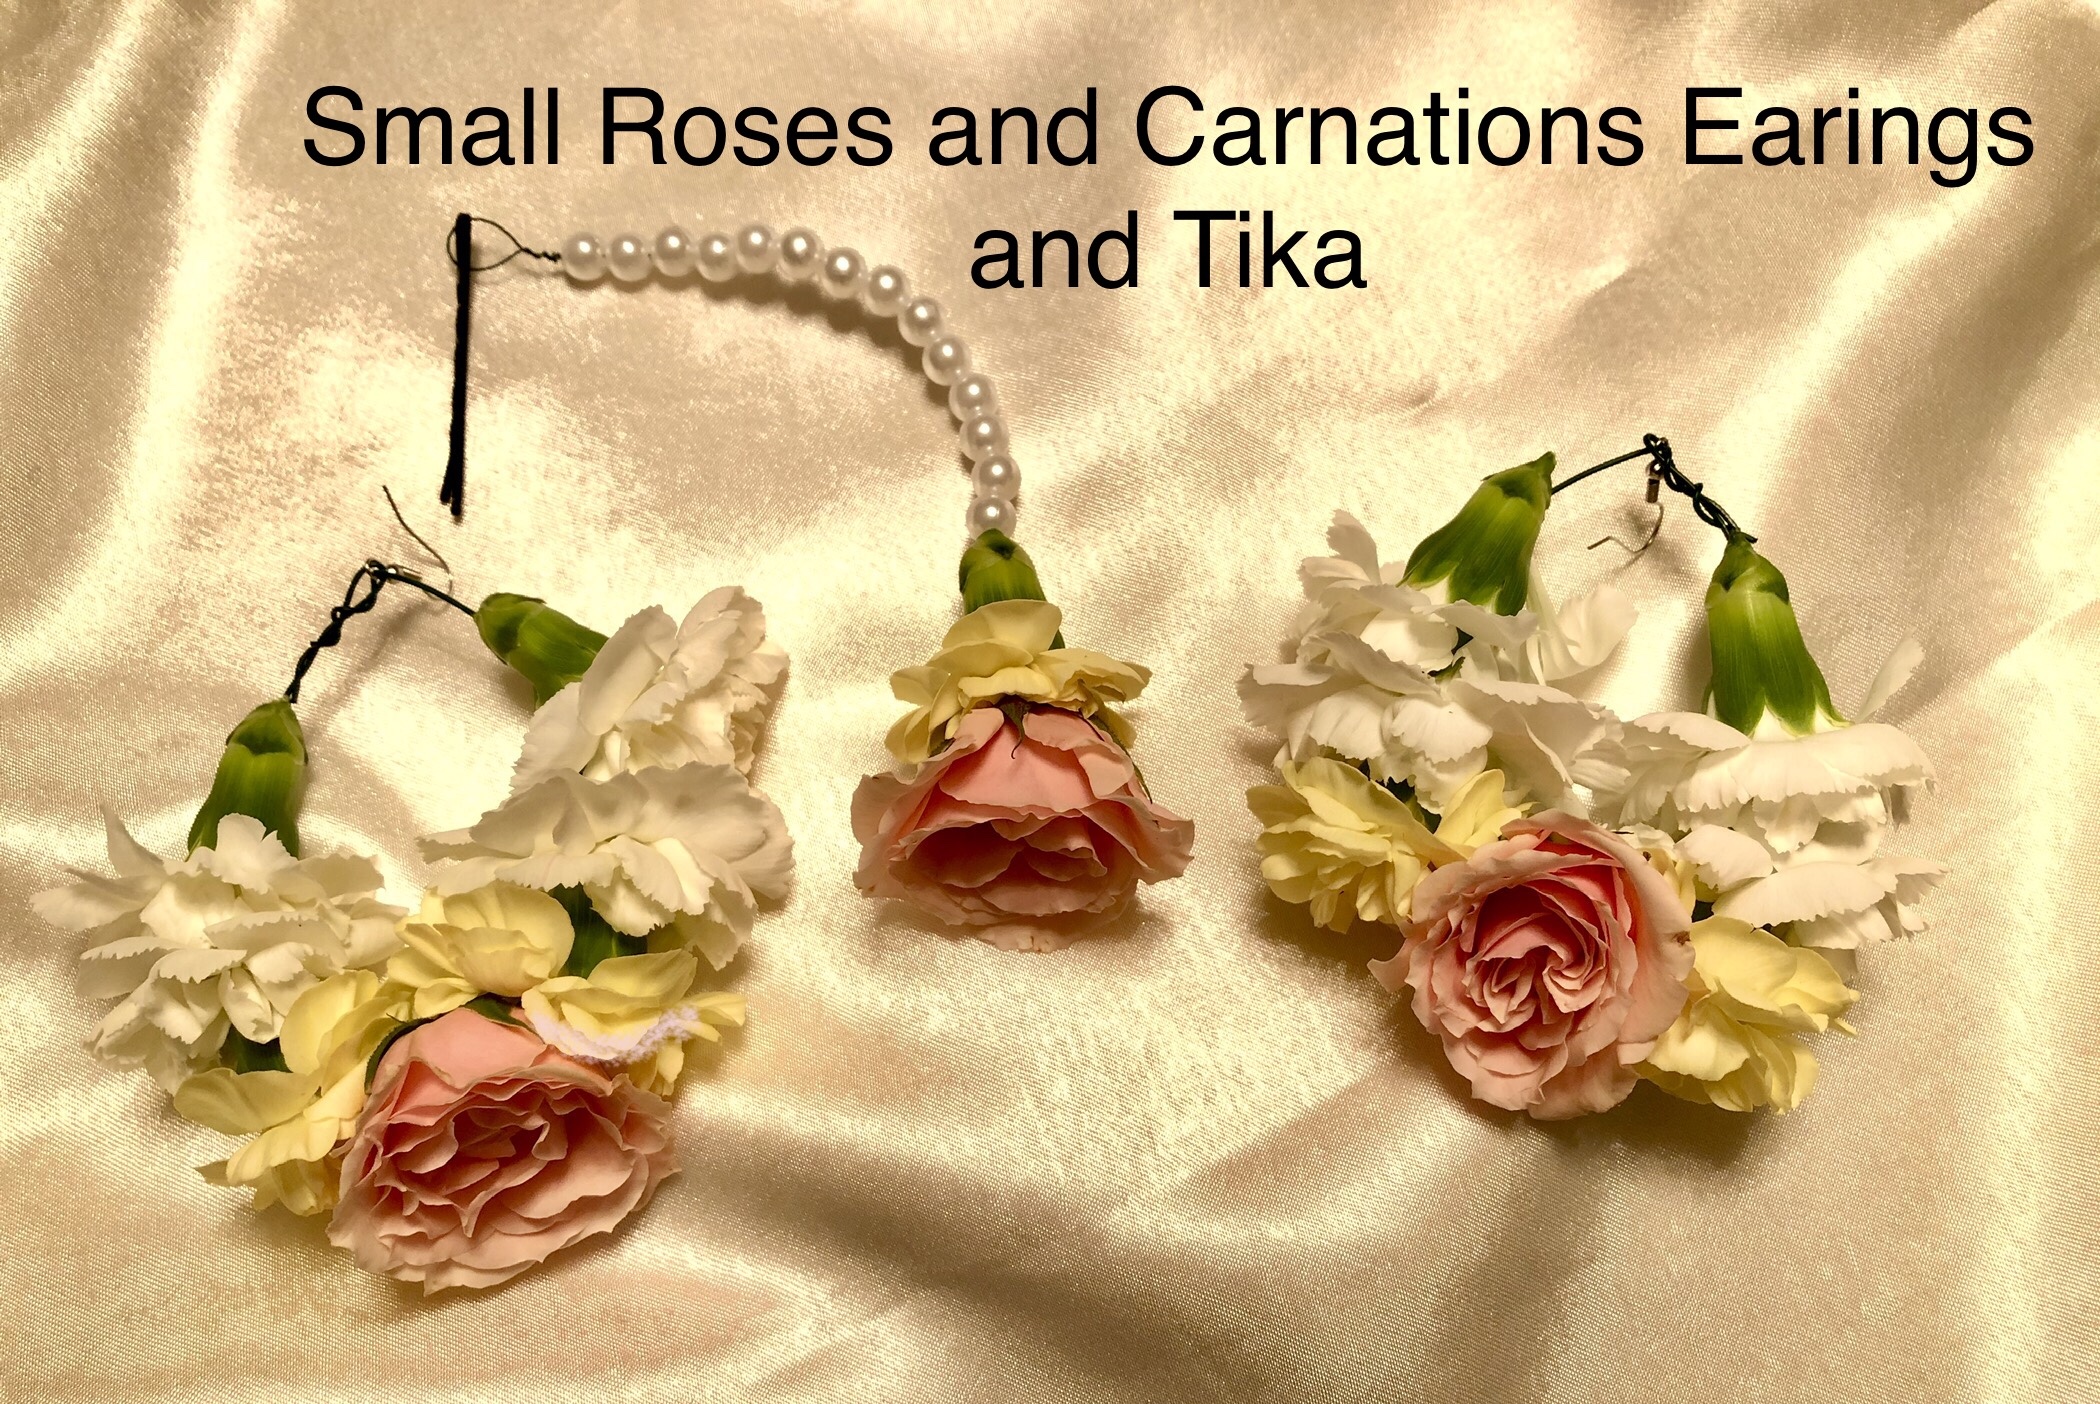 $50  Small Roses and Carnations Earings and Tika set                                